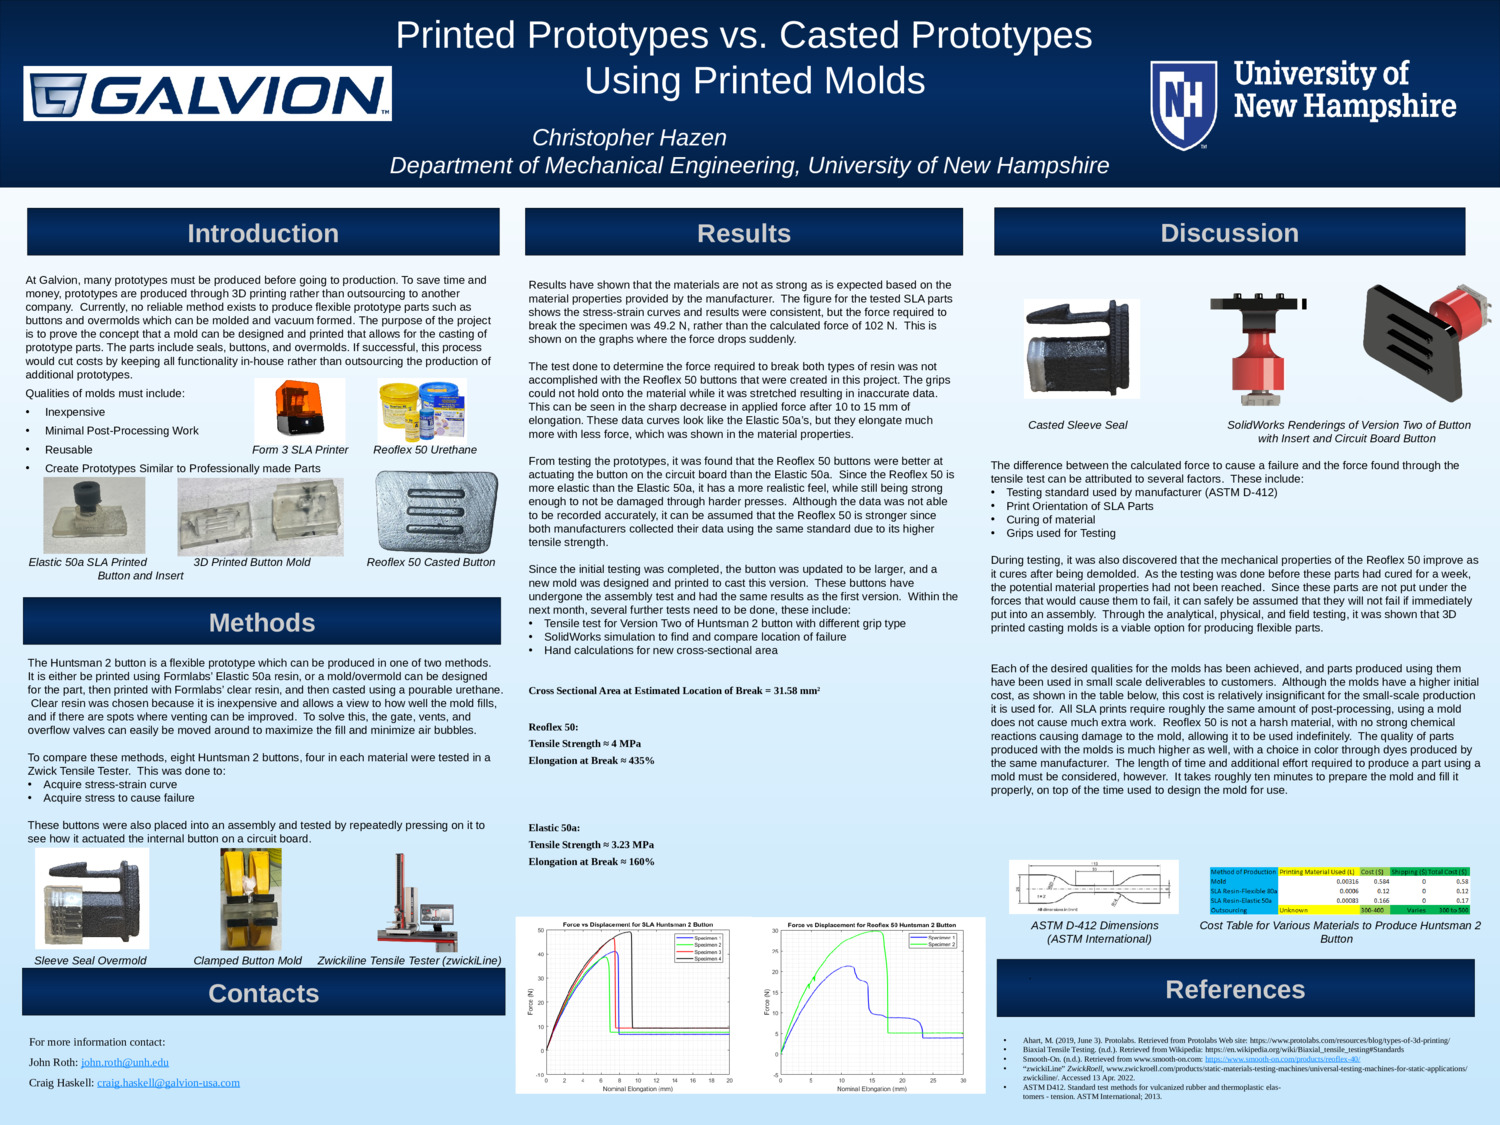 Printed Prototypes Vs. Casted Prototypes Using Printed Molds by cbh1026